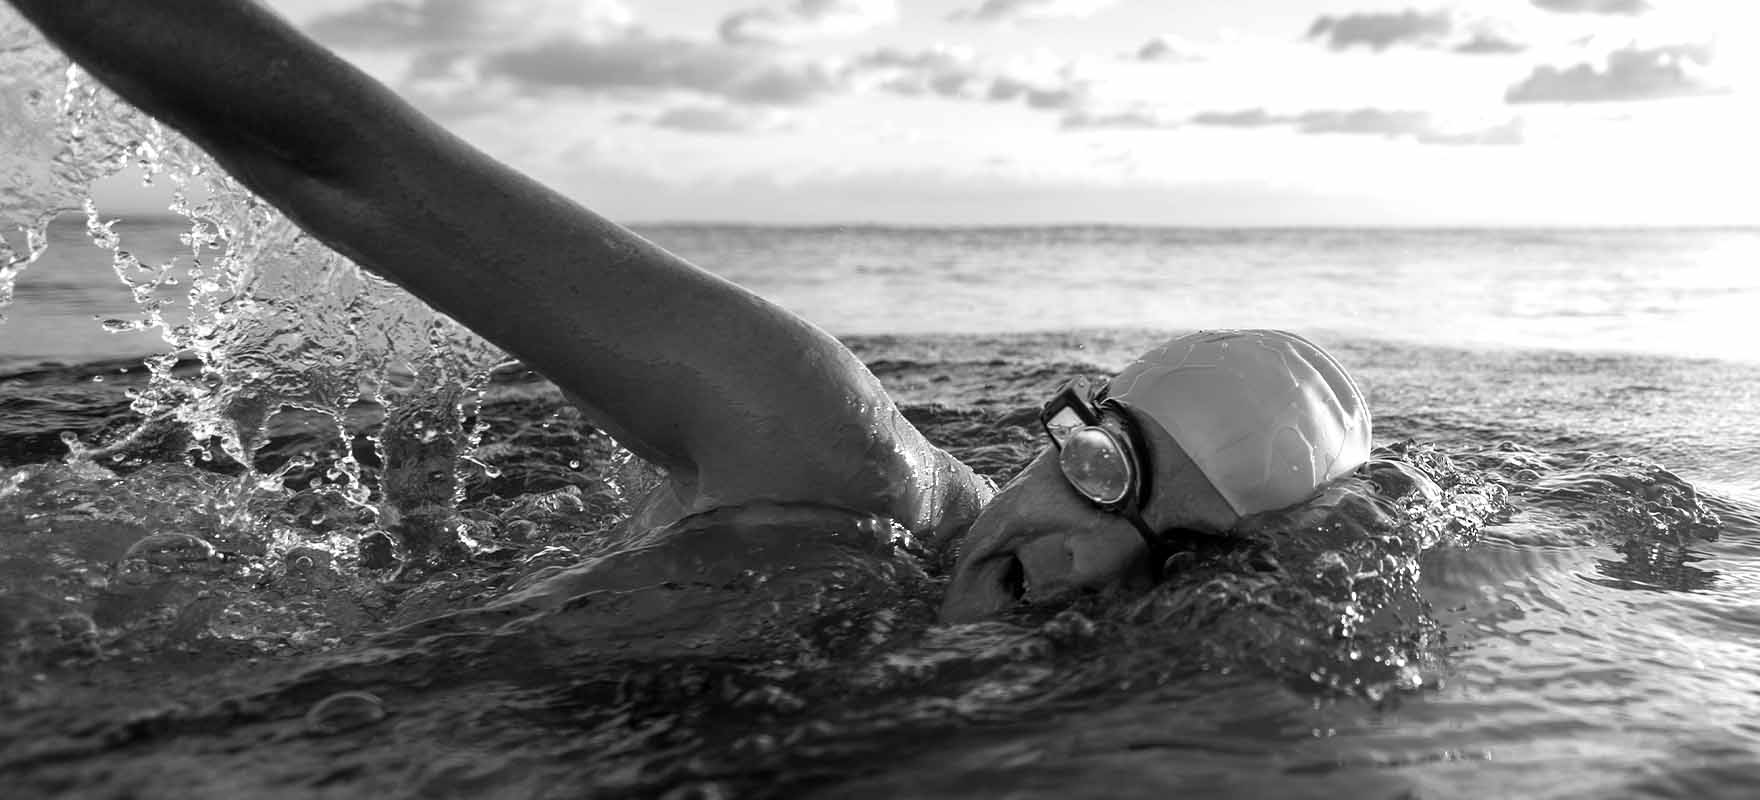 Open Water Swimming Training Workouts For Triathletes Form